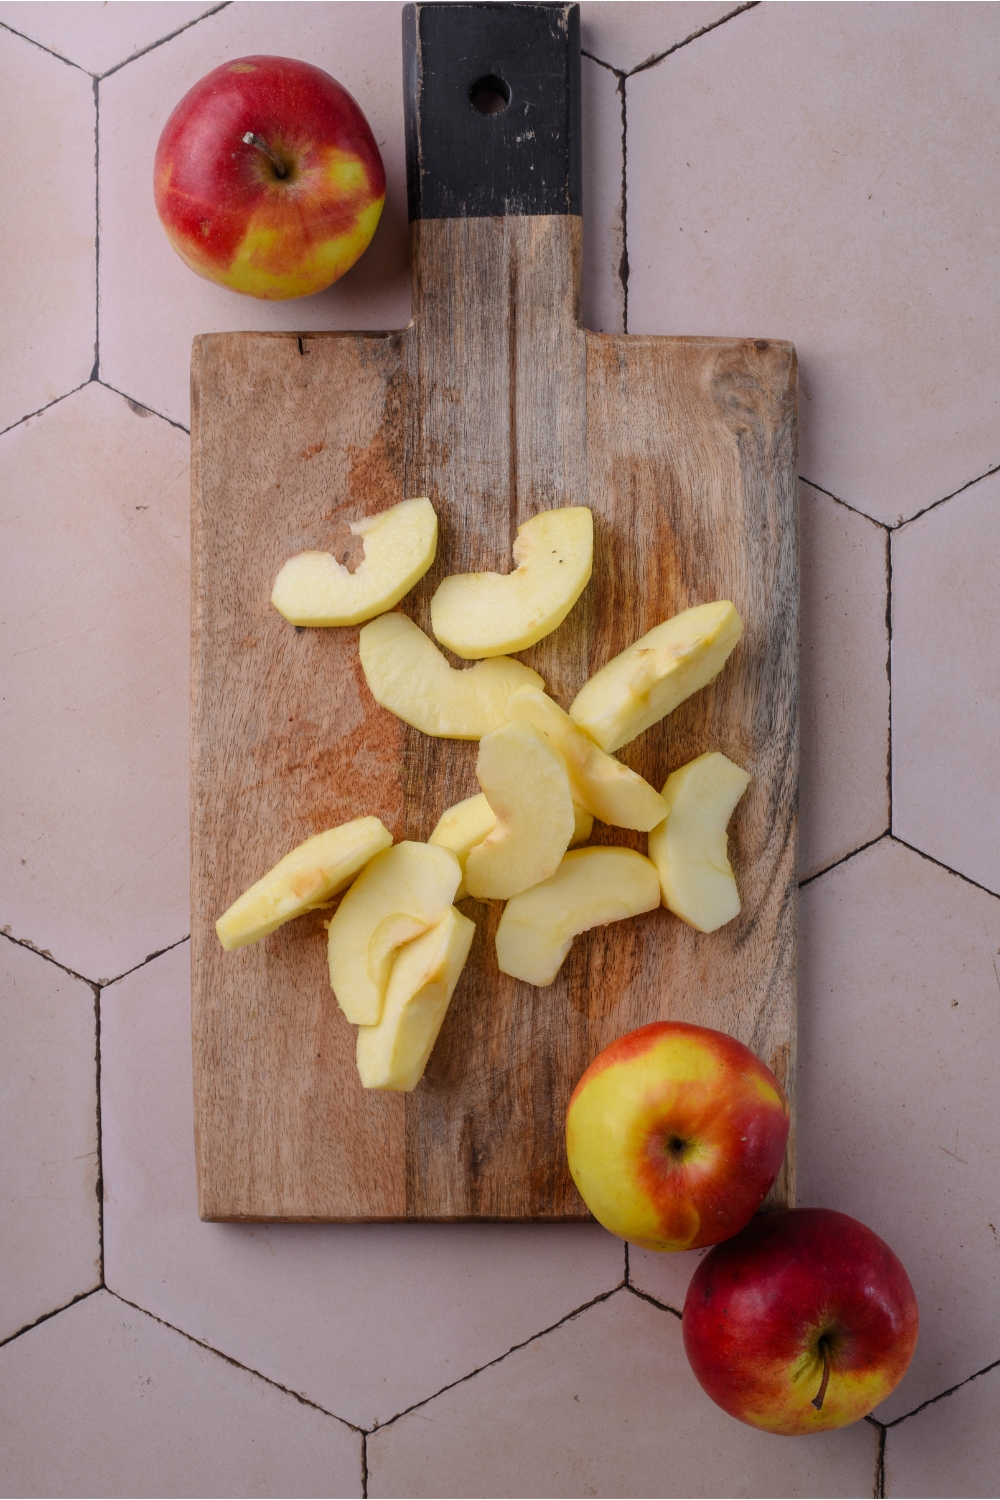 A wooden cutting board with sliced apples.